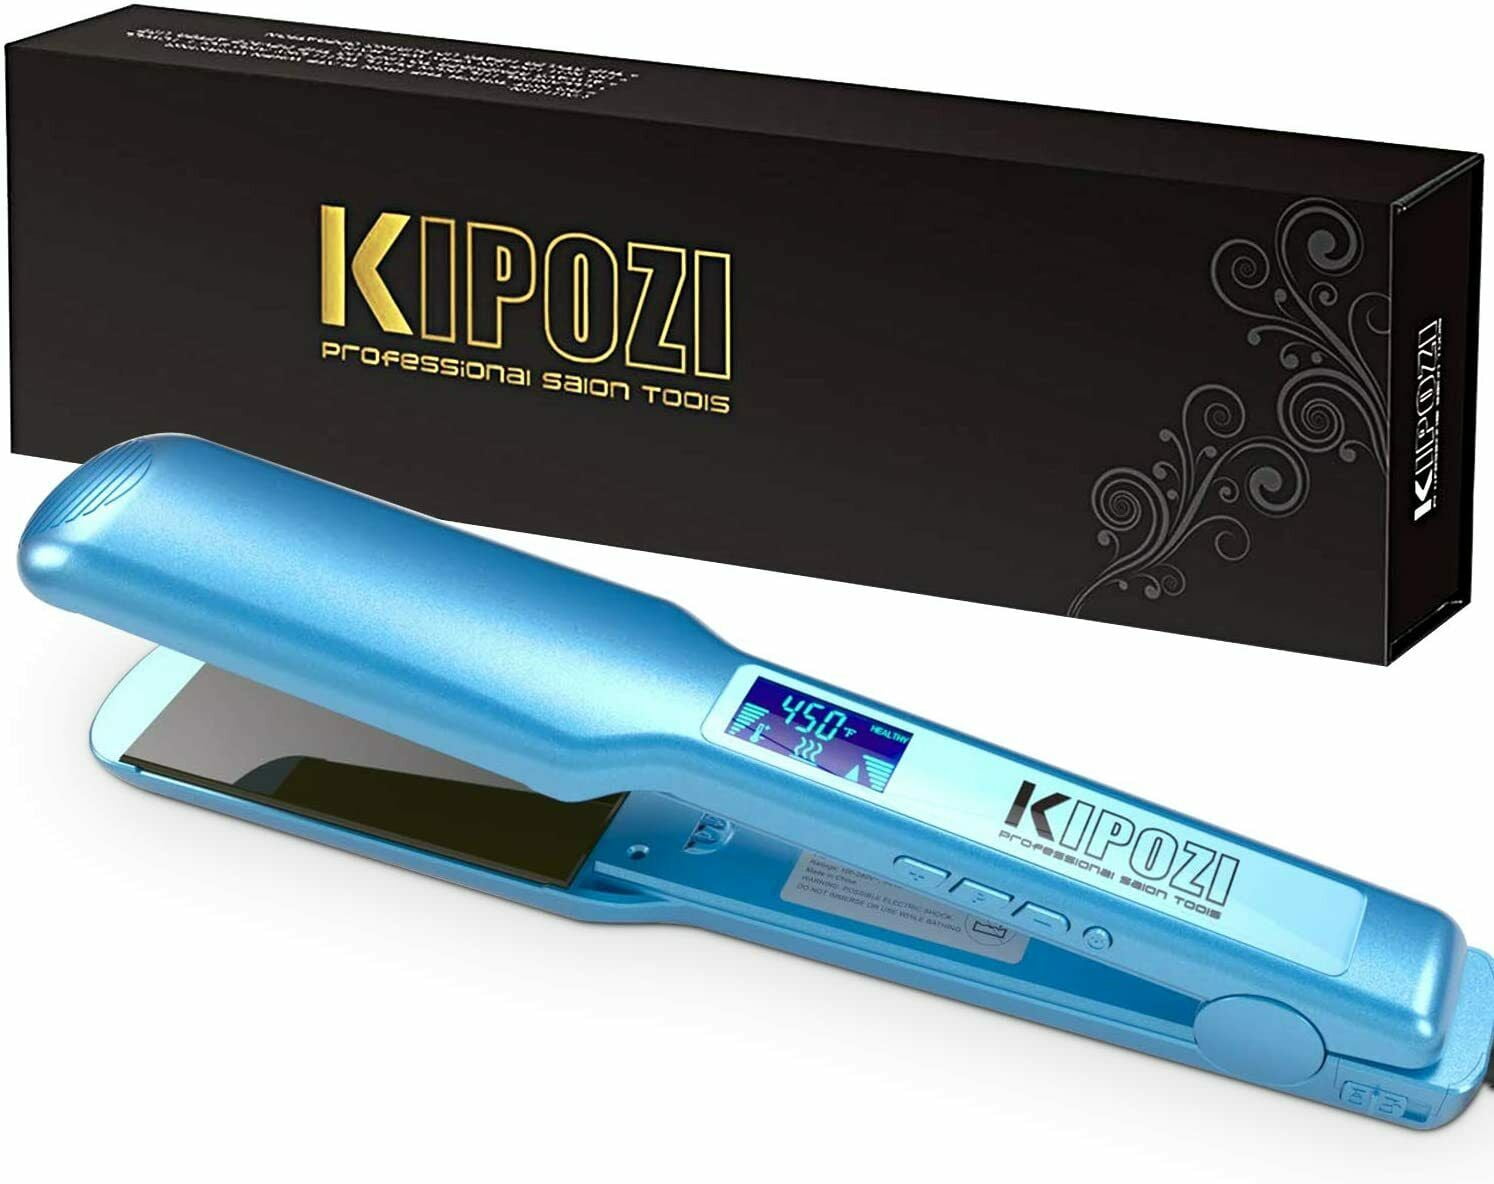 KIPOZI Negative Ion Flat Iron, Anti-Static Hair Straightener with 1.75 Inch Floating Titanium Wide Plates, Blue